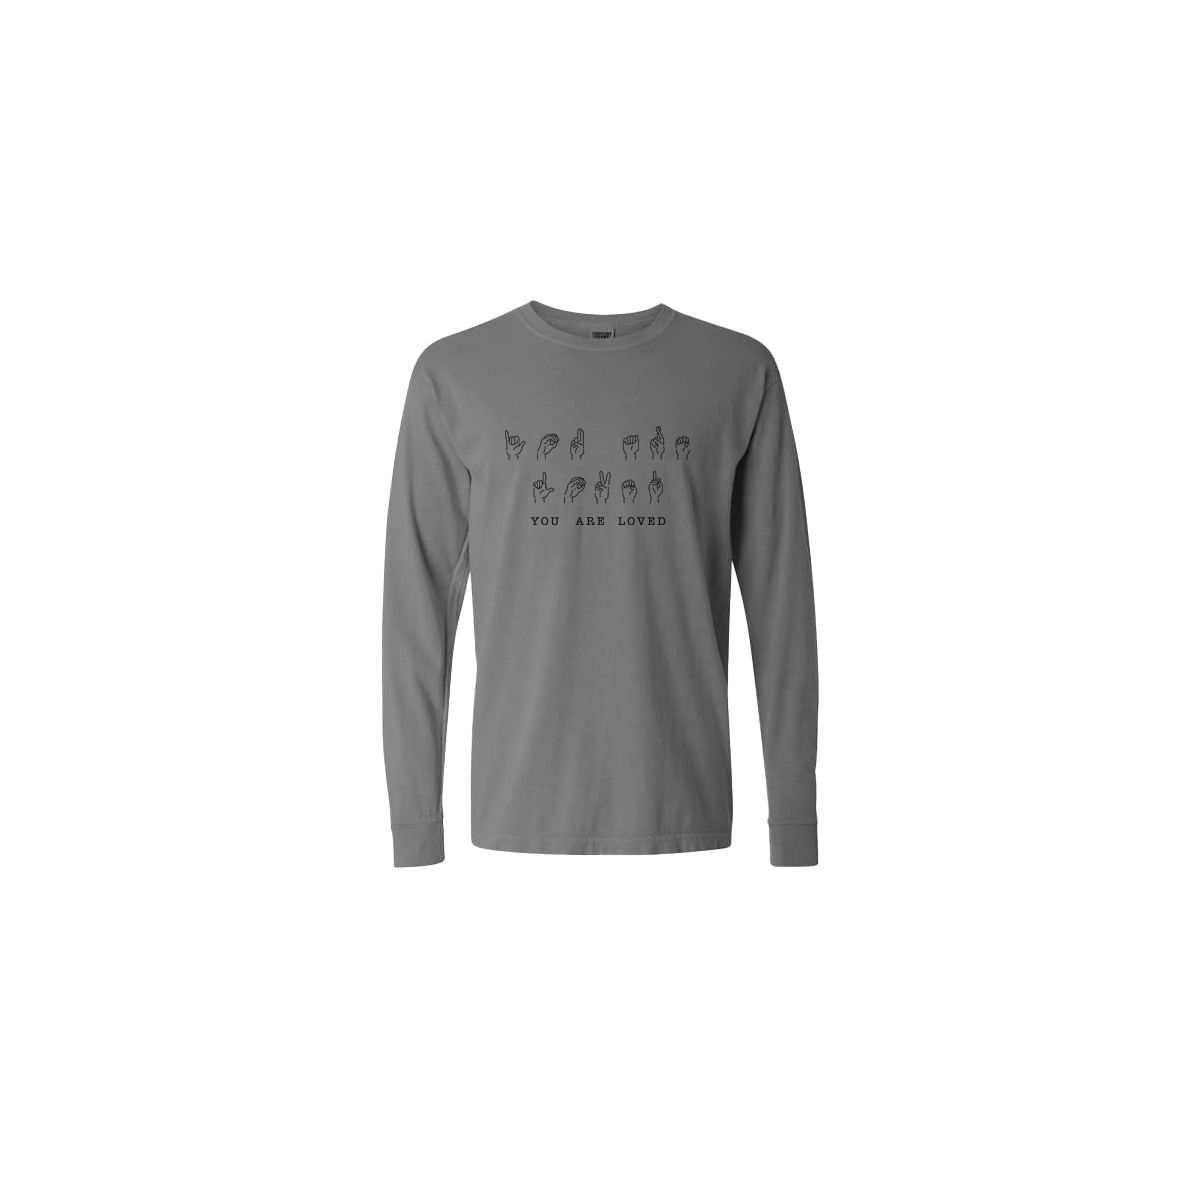 You Are Loved Sign Language Embroidered Grey Long Sleeve Tshirt - Mental Health Awareness Clothing